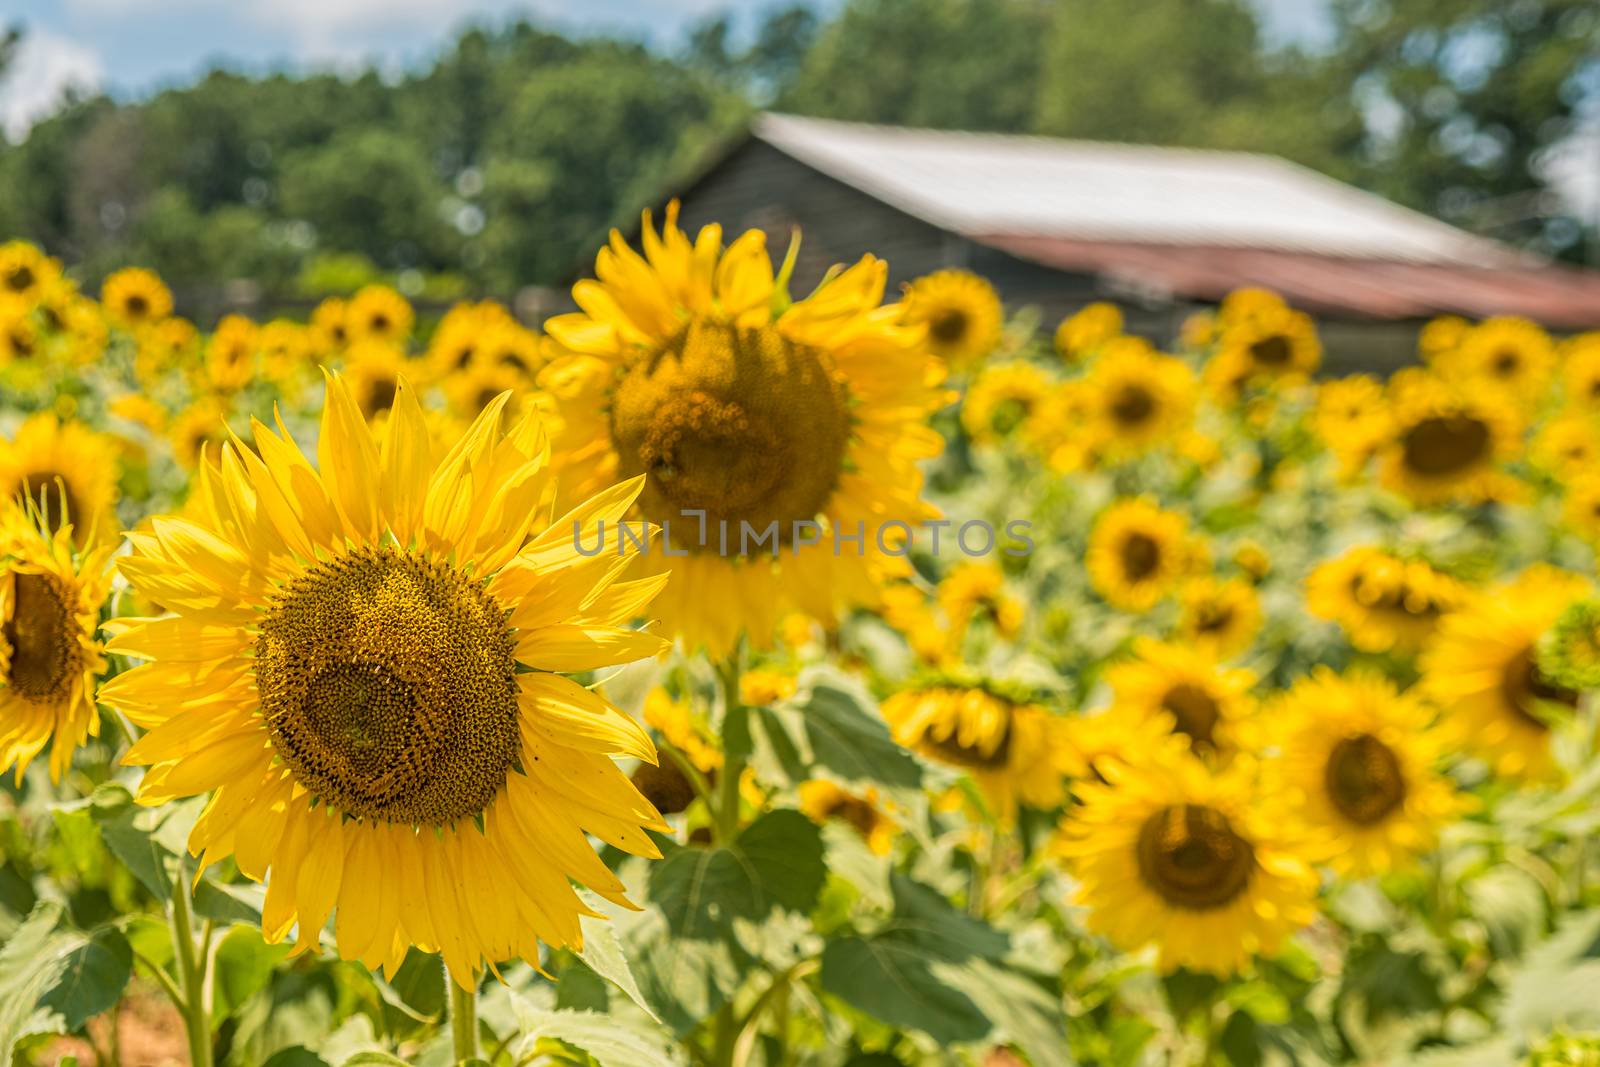 Golden Sunflowers and Barn by dbvirago